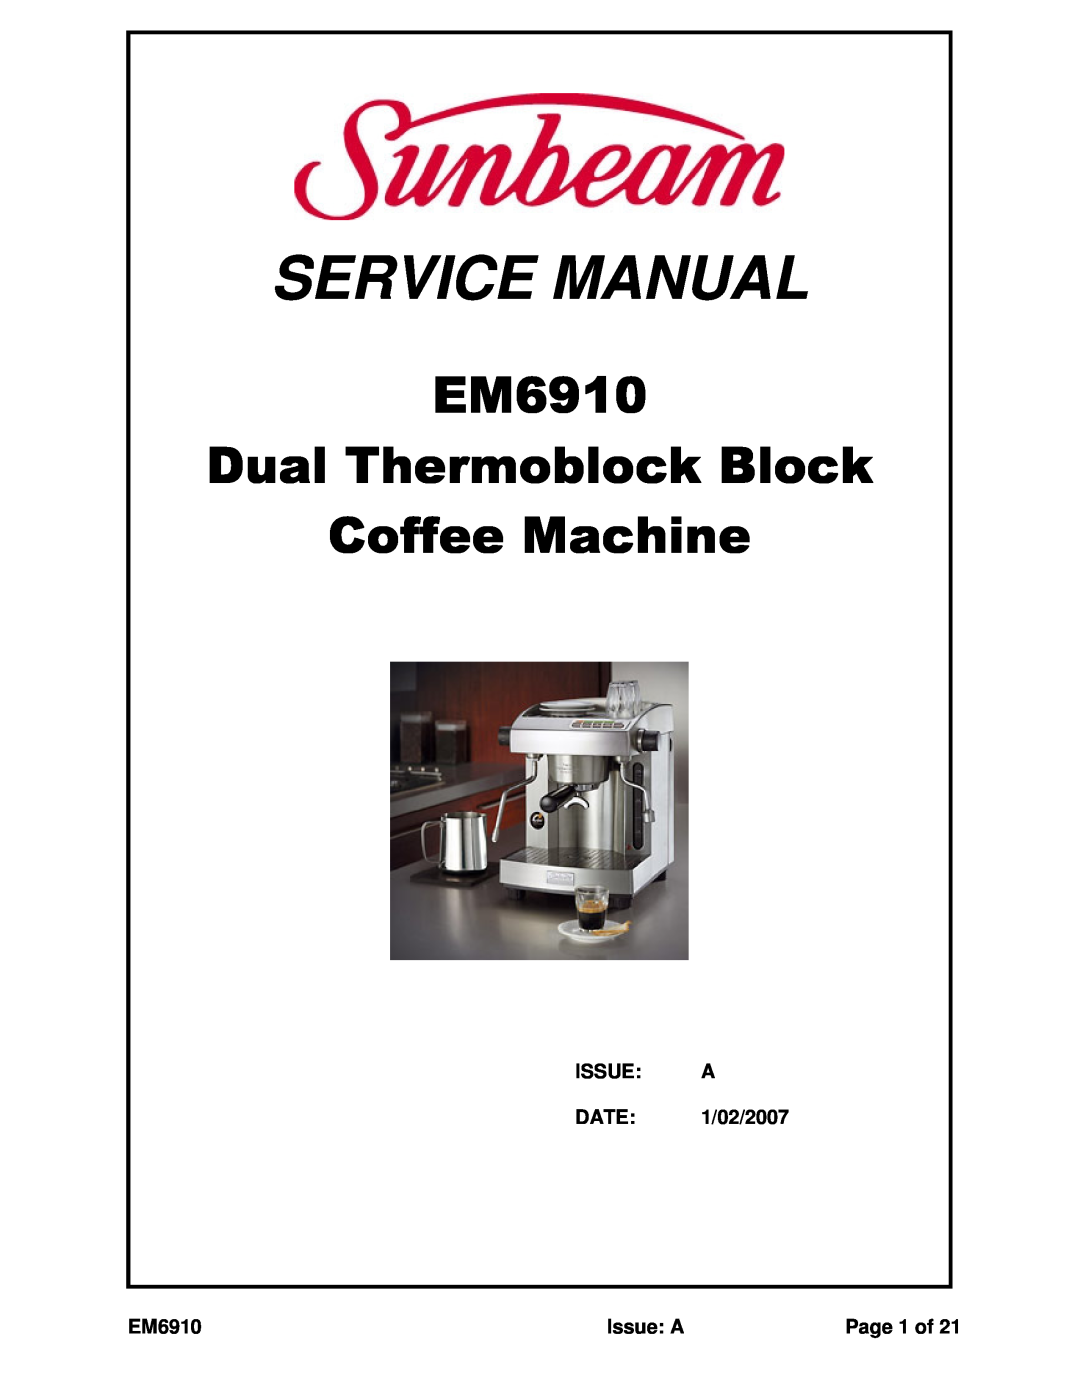 Sunbeam service manual ISSUE A DATE 1/02/2007, Issue A, Page 1 of, EM6910 Dual Thermoblock Block Coffee Machine 